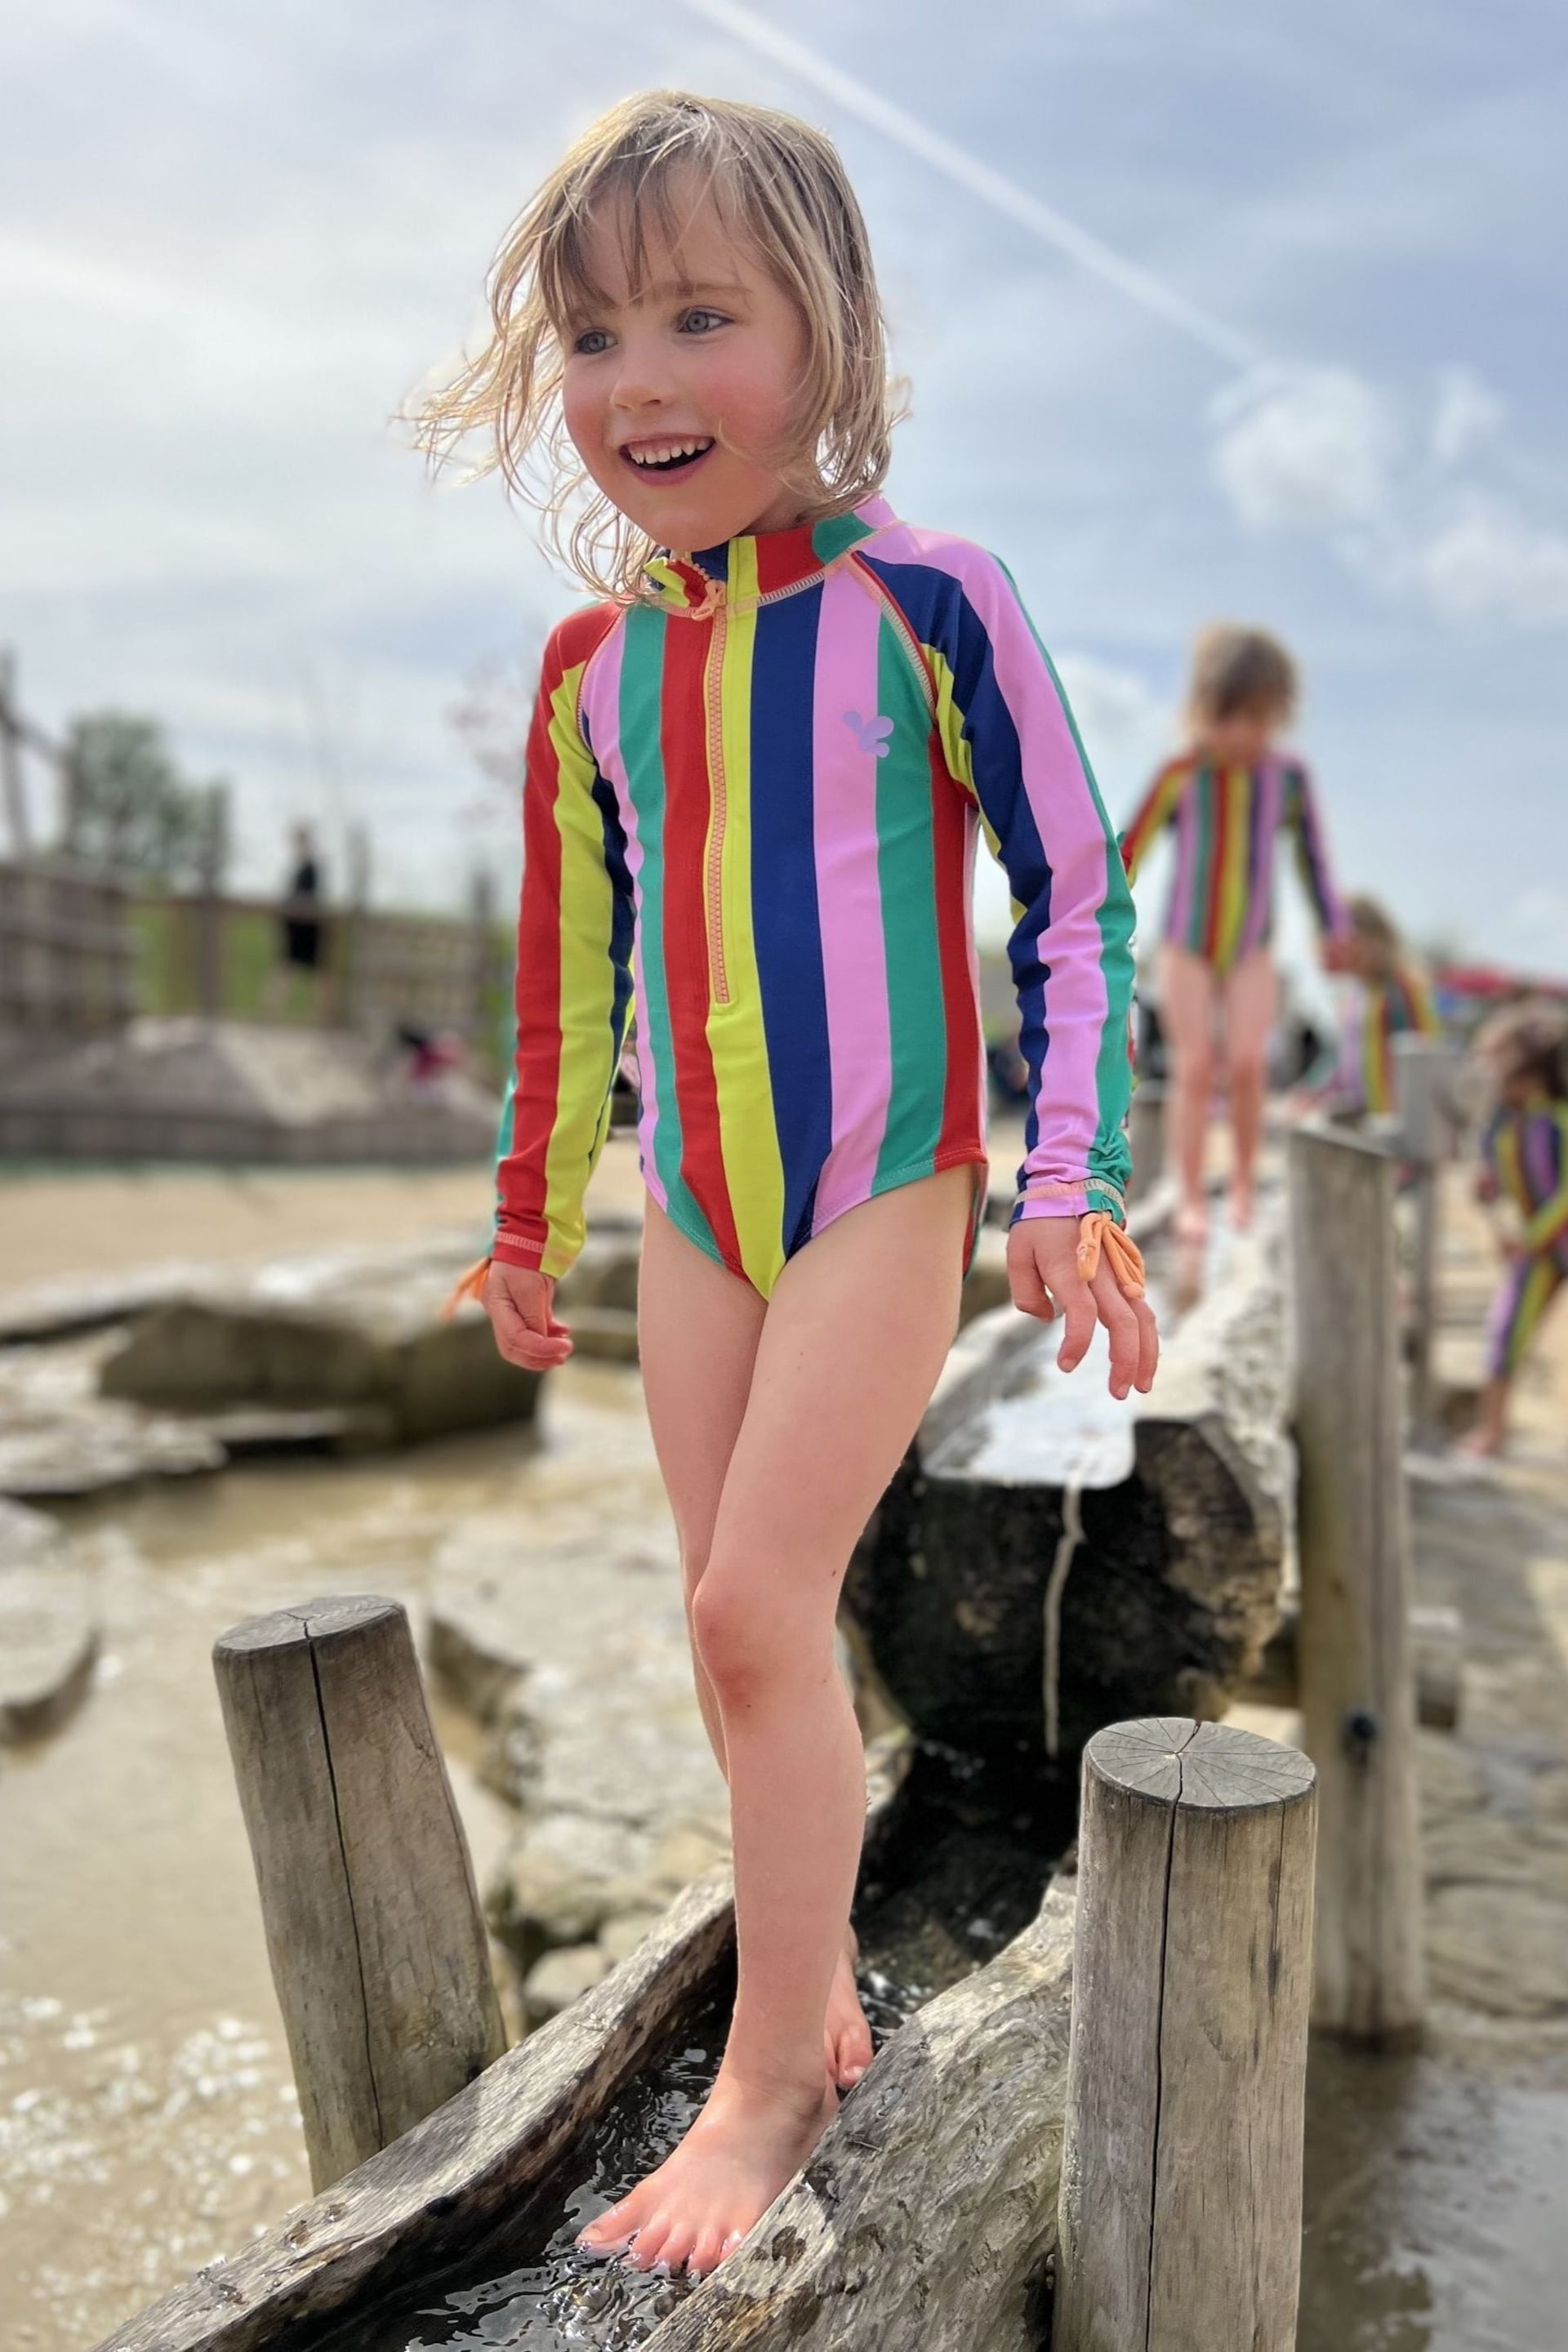 Muddy Puddles Recycled UV Protective Swimsuit - Image 1 of 3